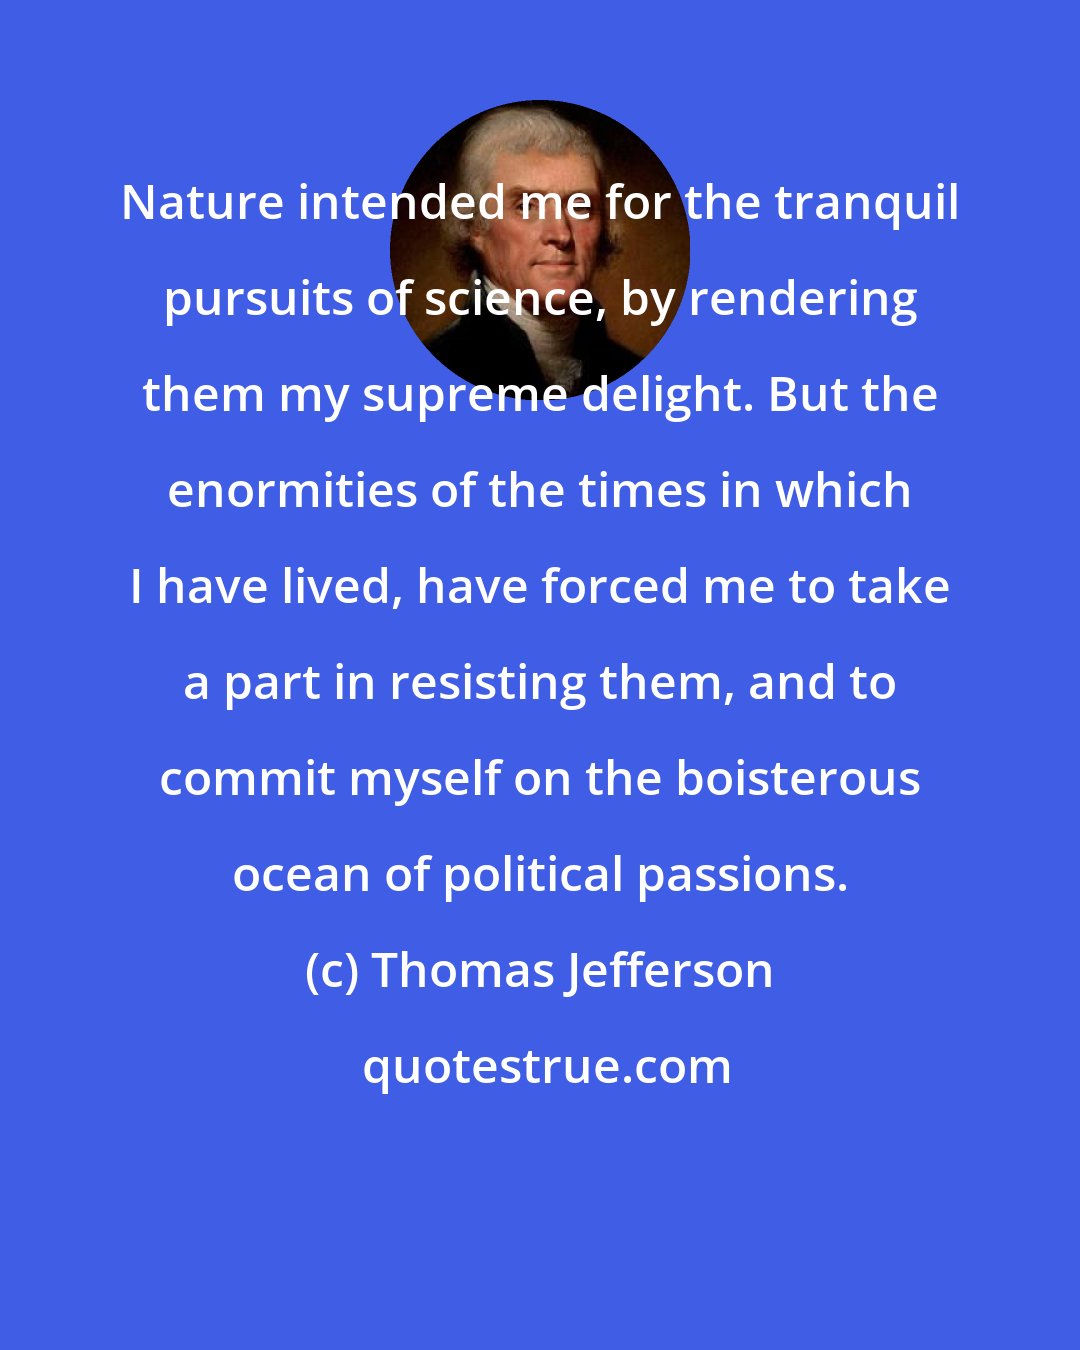 Thomas Jefferson: Nature intended me for the tranquil pursuits of science, by rendering them my supreme delight. But the enormities of the times in which I have lived, have forced me to take a part in resisting them, and to commit myself on the boisterous ocean of political passions.